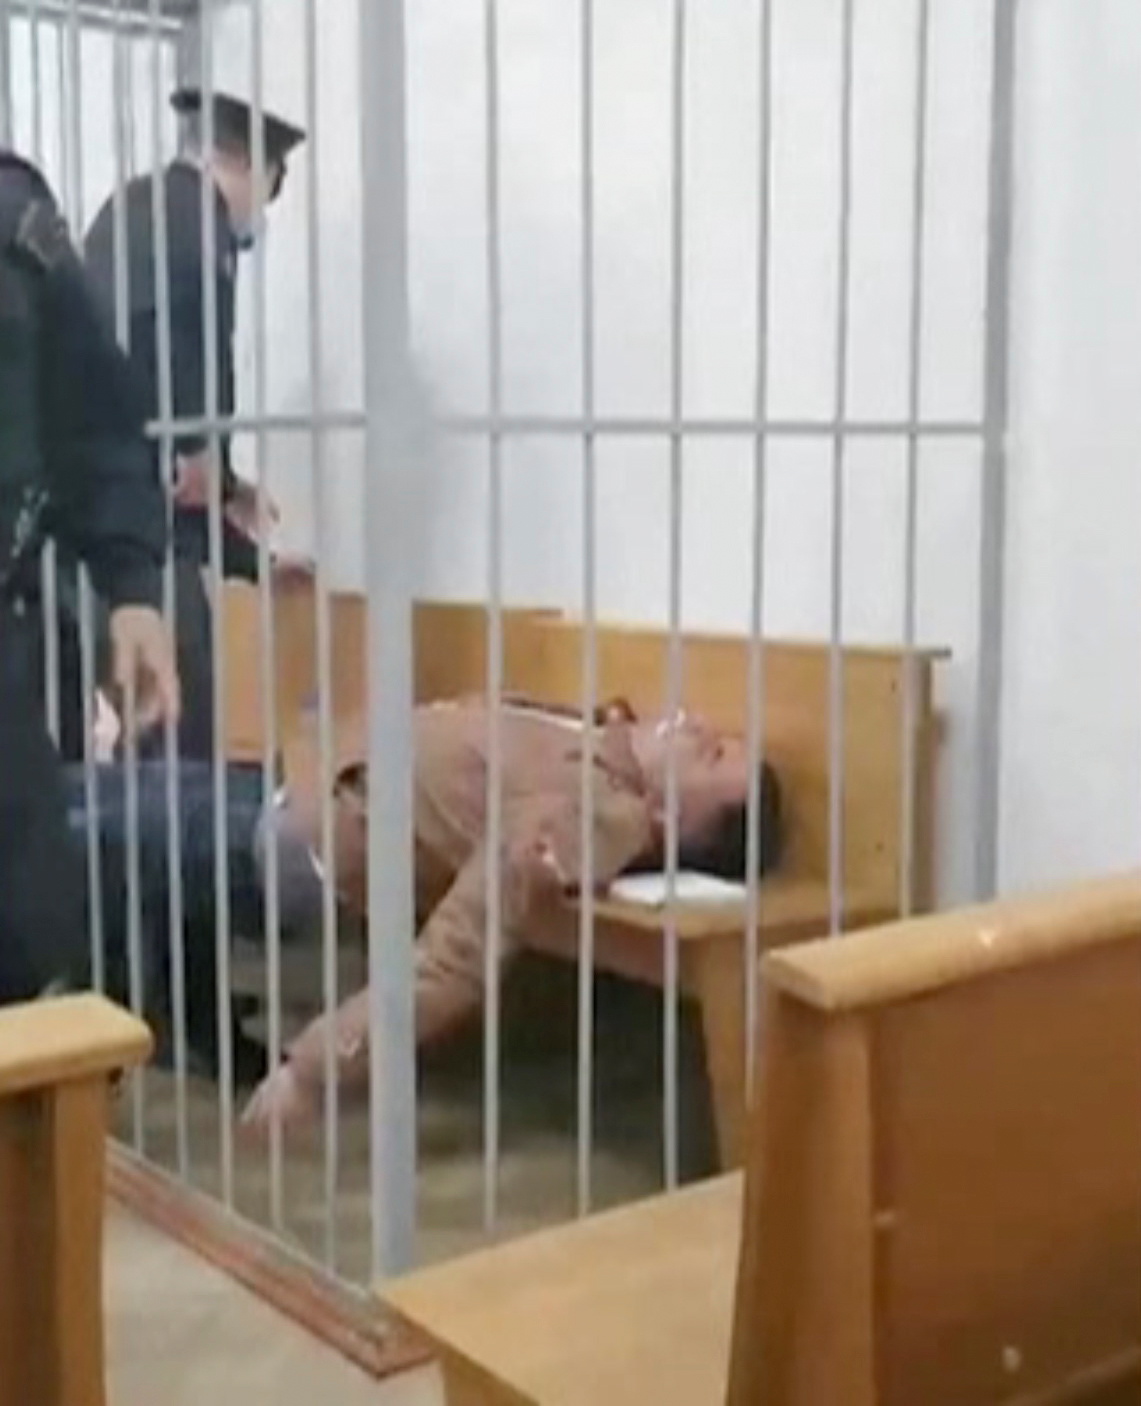 Belarusian prisoner Stepan Latypov lies on a bench after an attempt to cut his throat inside a defendant's cage in a courtroom in Minsk